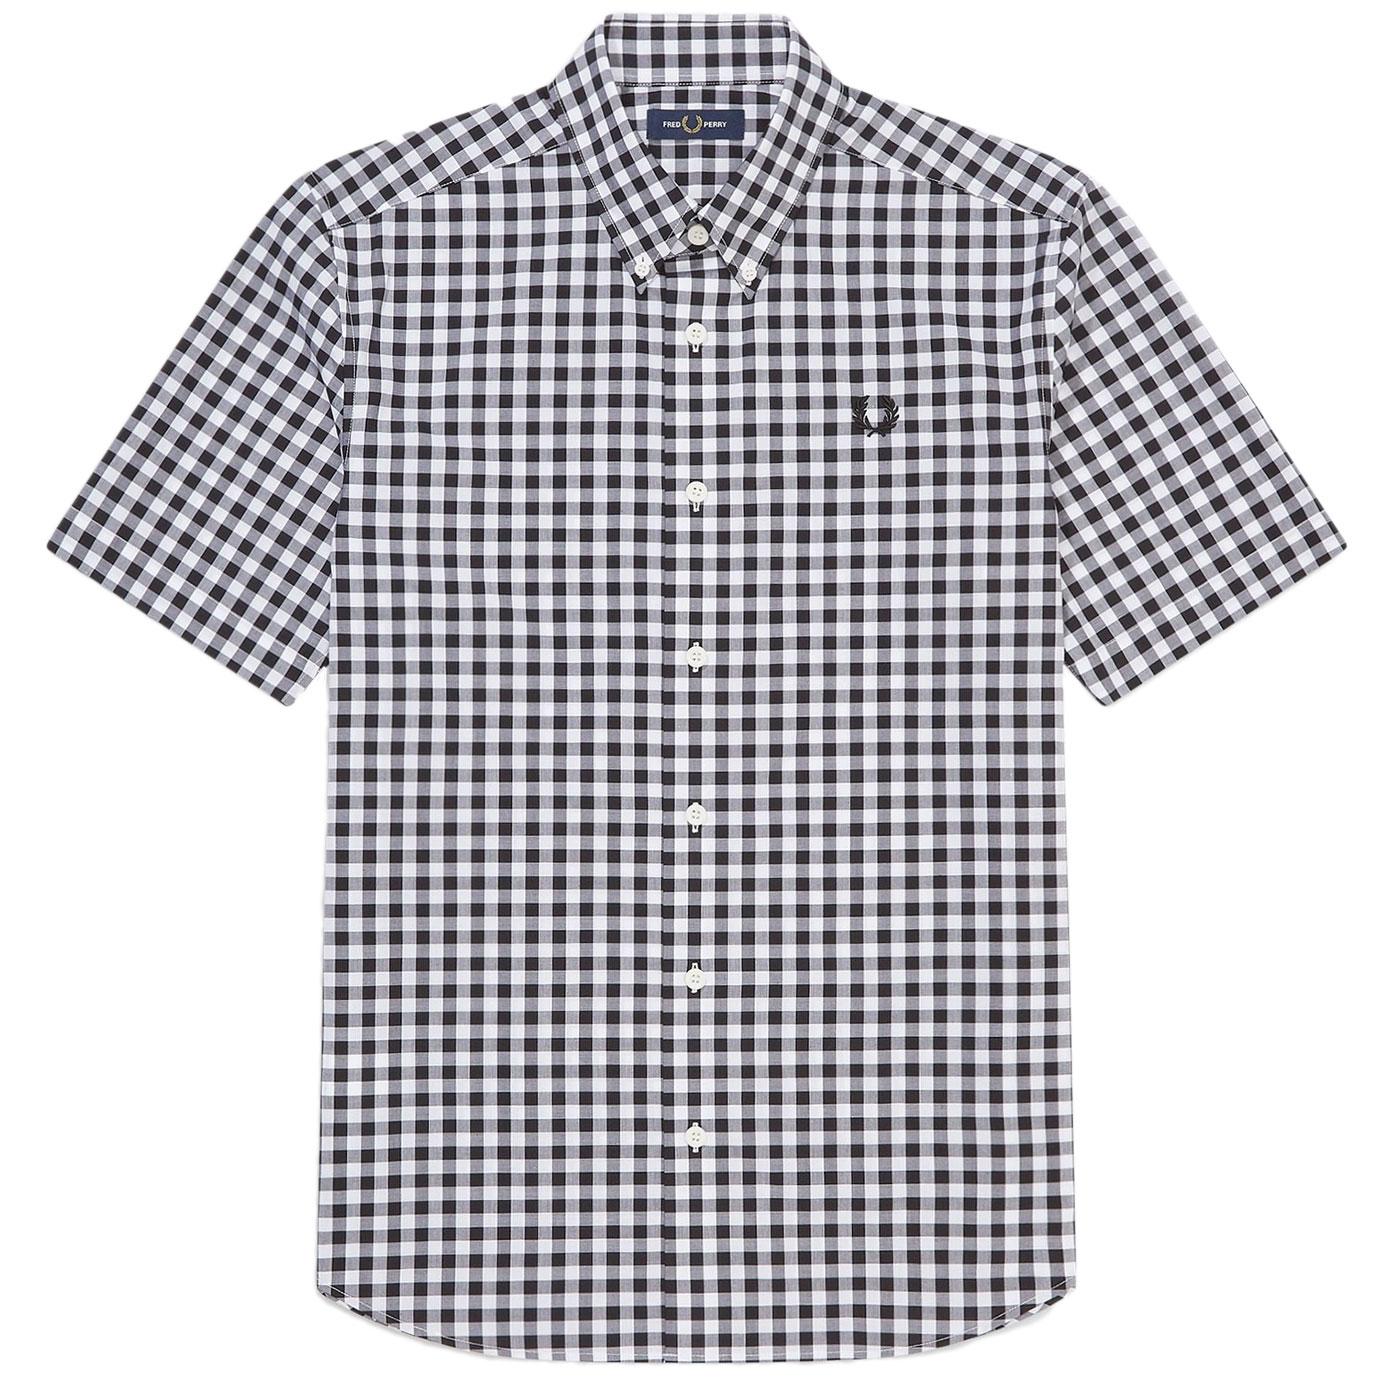 FRED PERRY Mens Modernist 2 Colour Gingham Shirt W